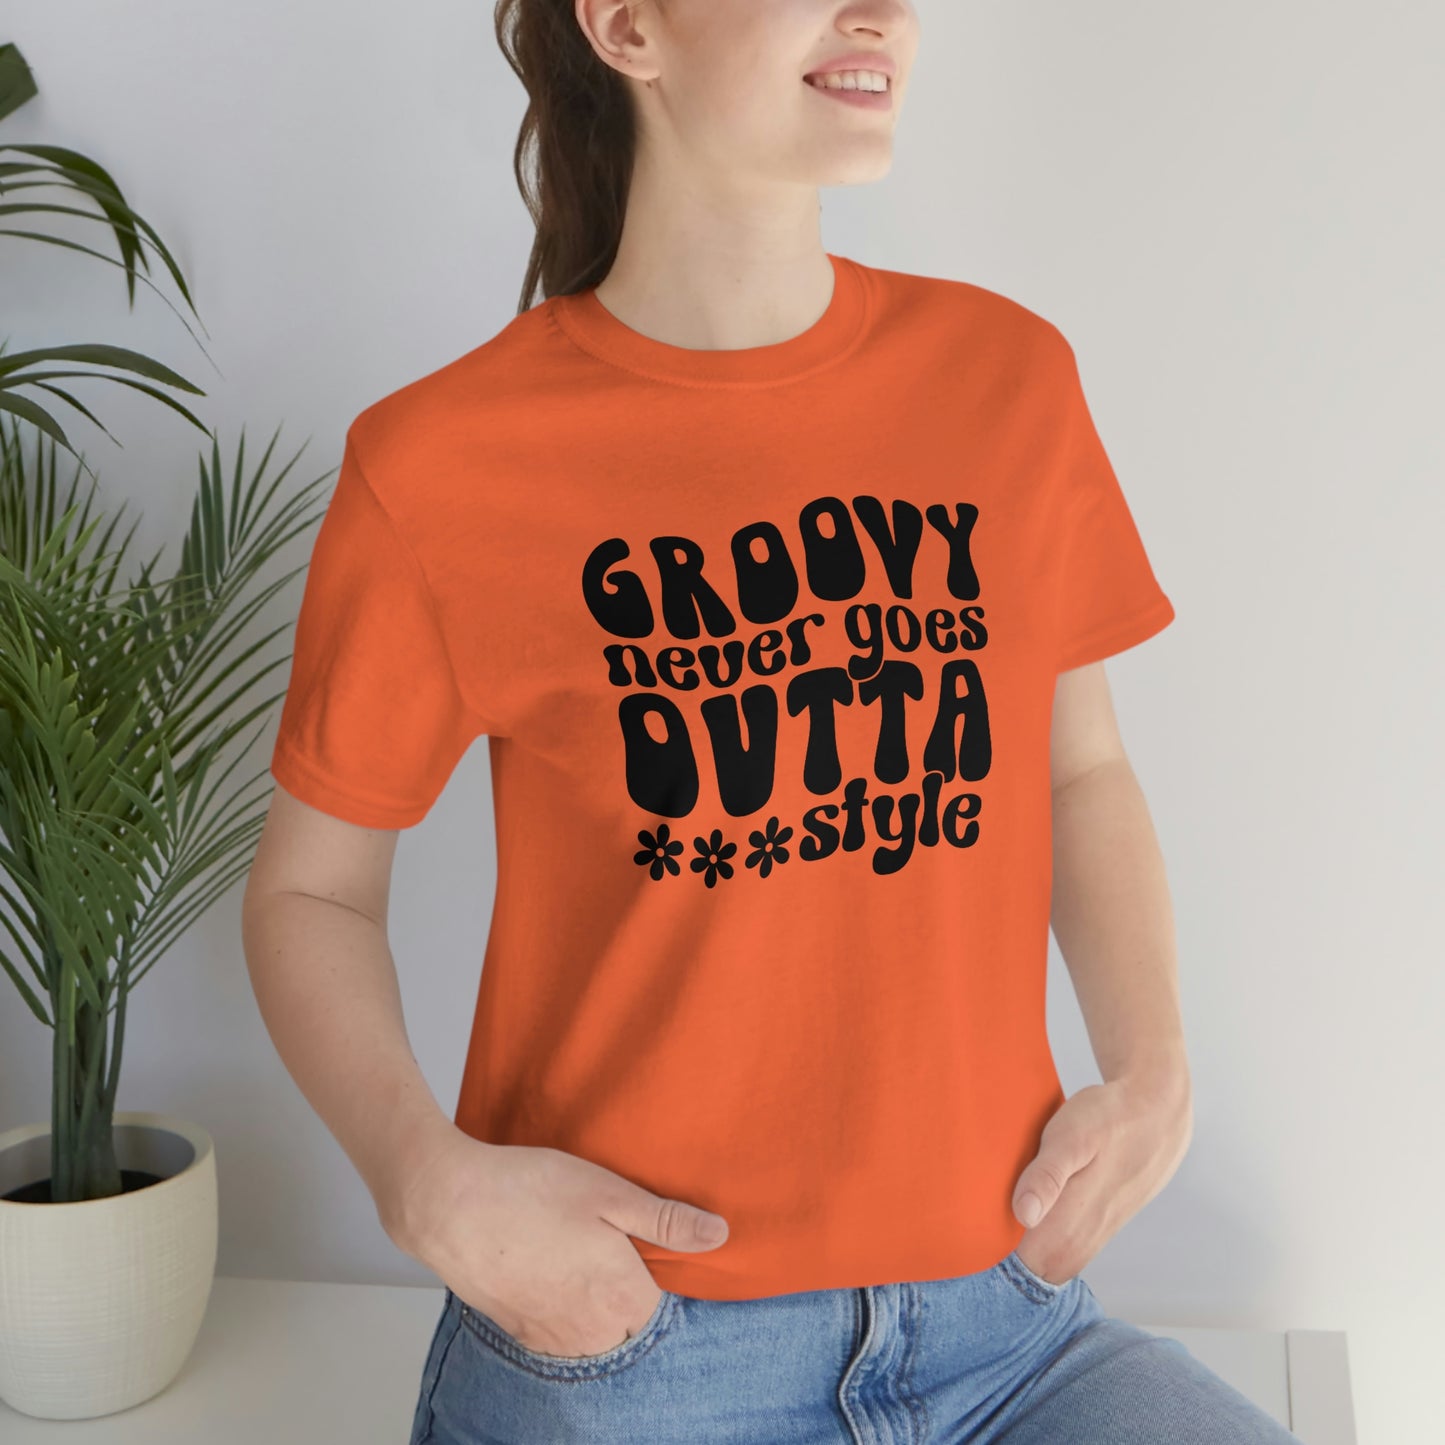 Groovy Never Goes Out of Style Unisex Jersey Short Sleeve Tee